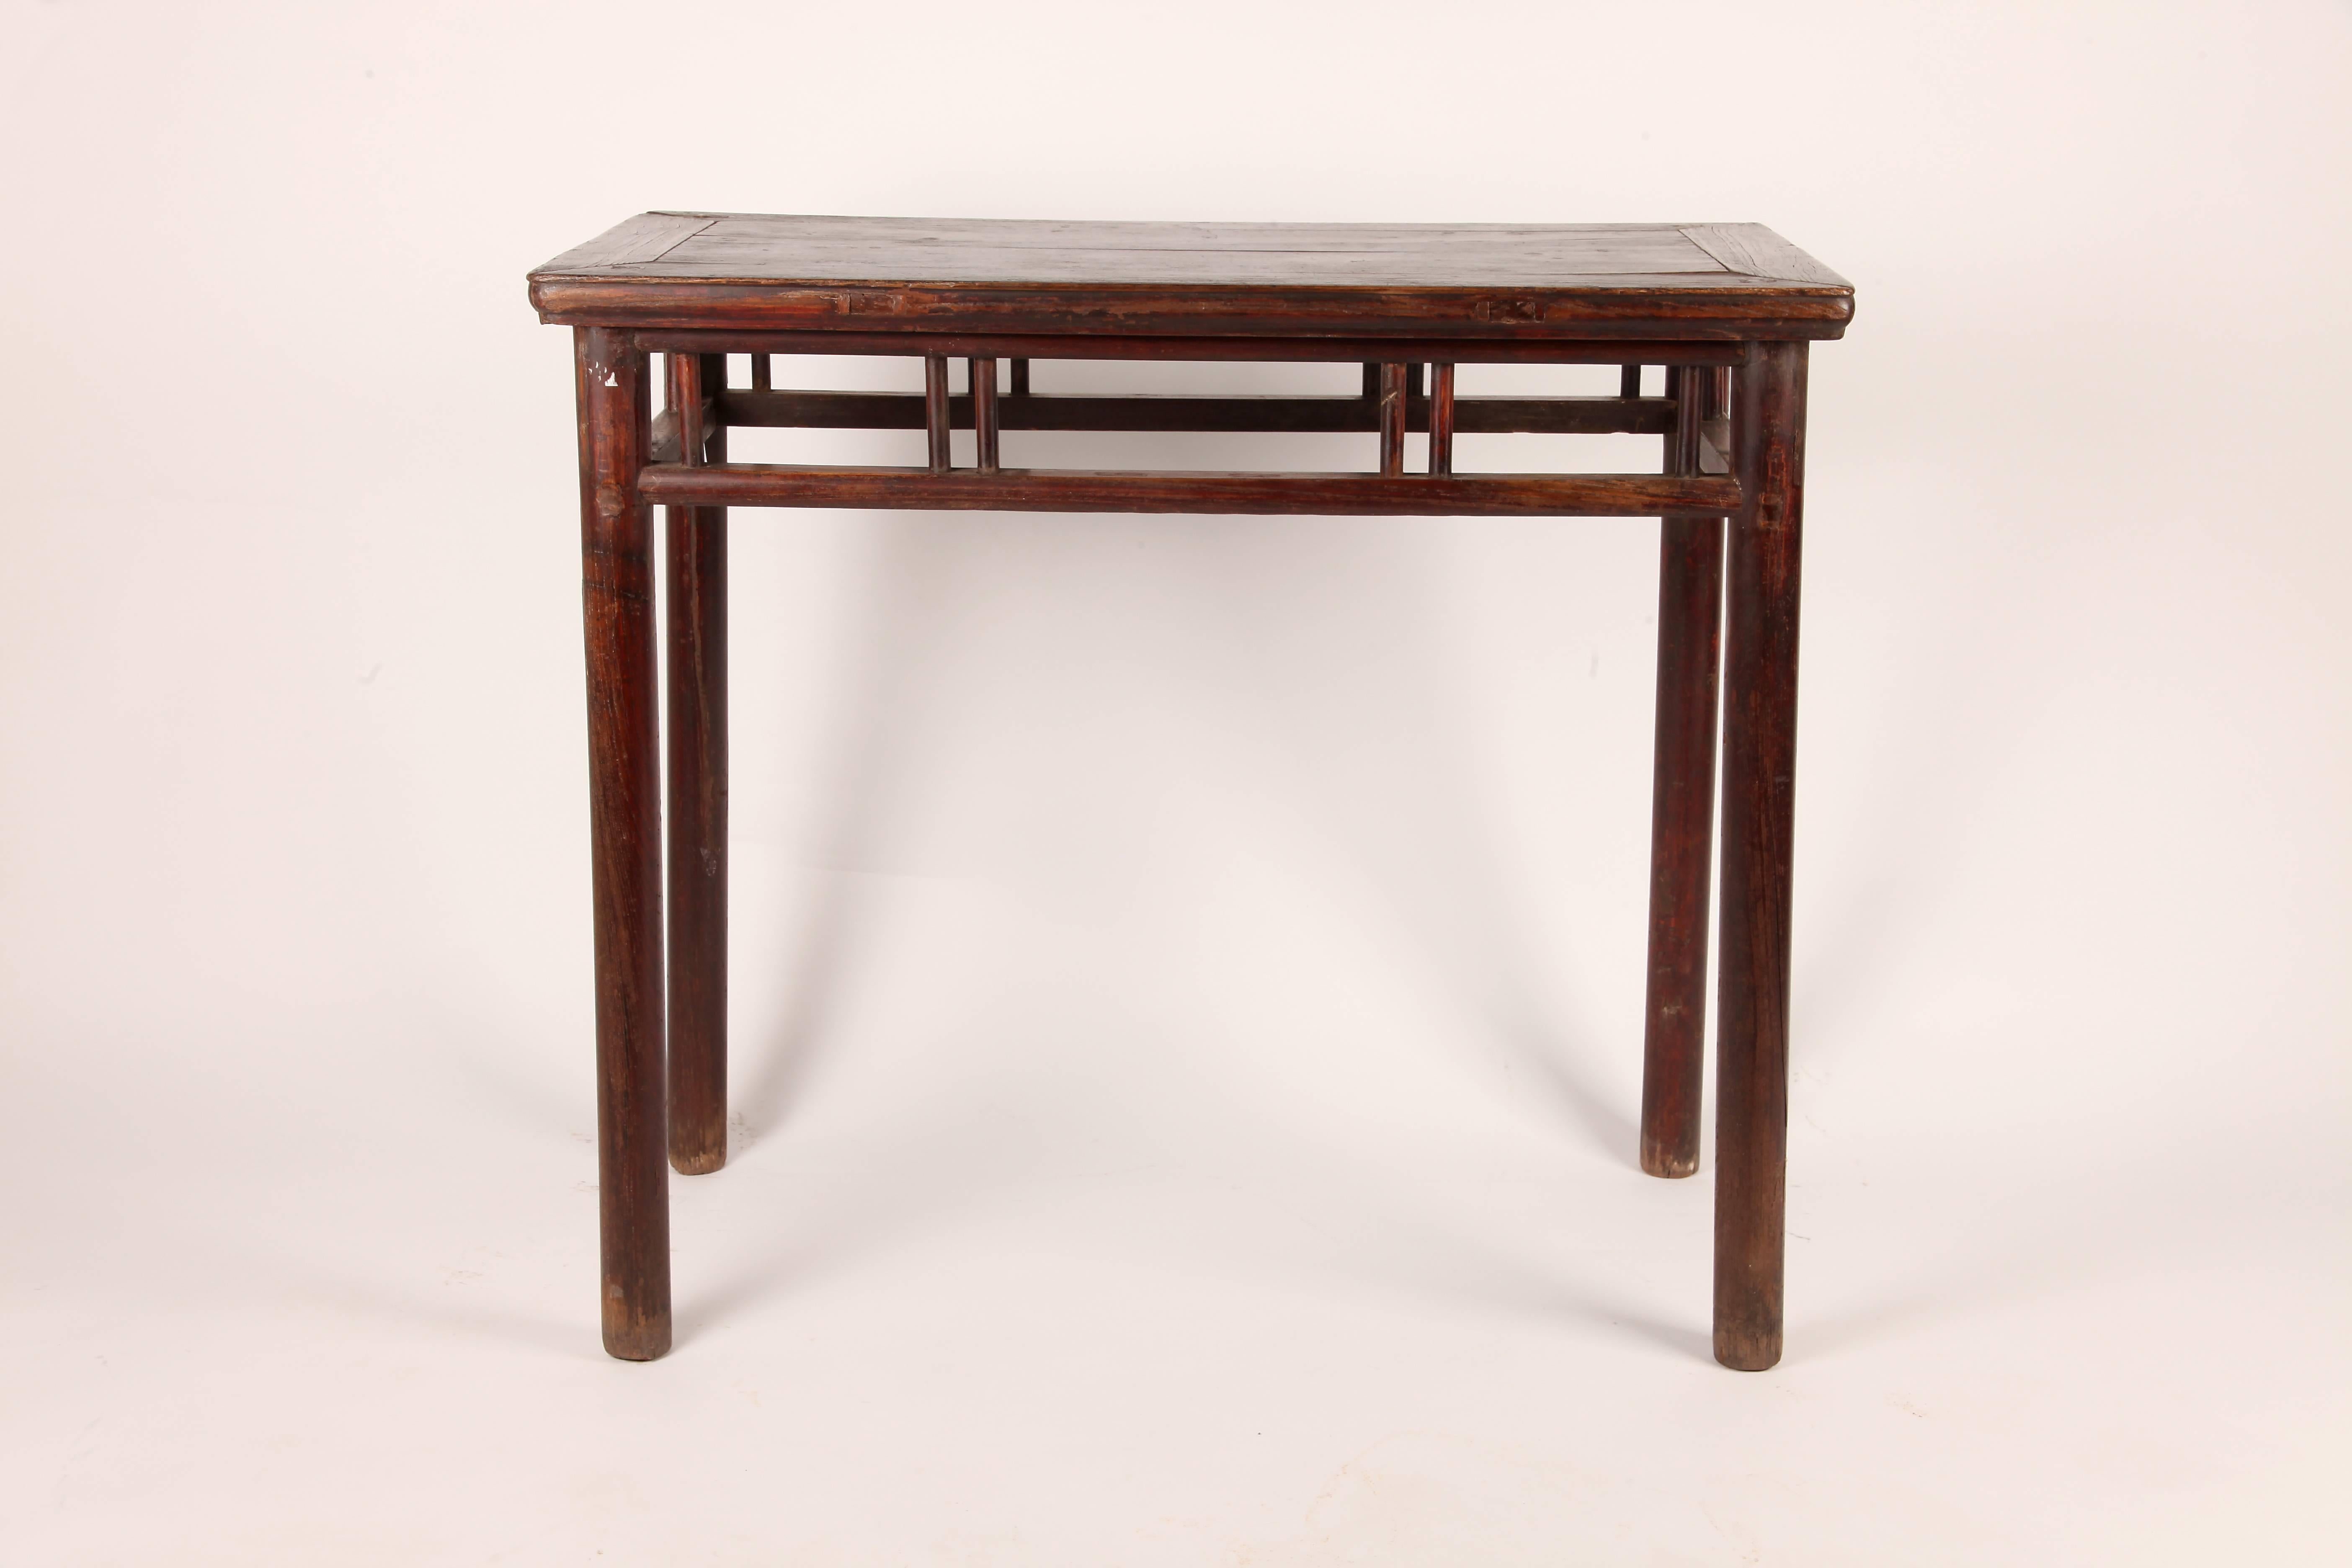 These Chinese wine tables are made from elmwood circa 1850 and can also function as a bench as well.